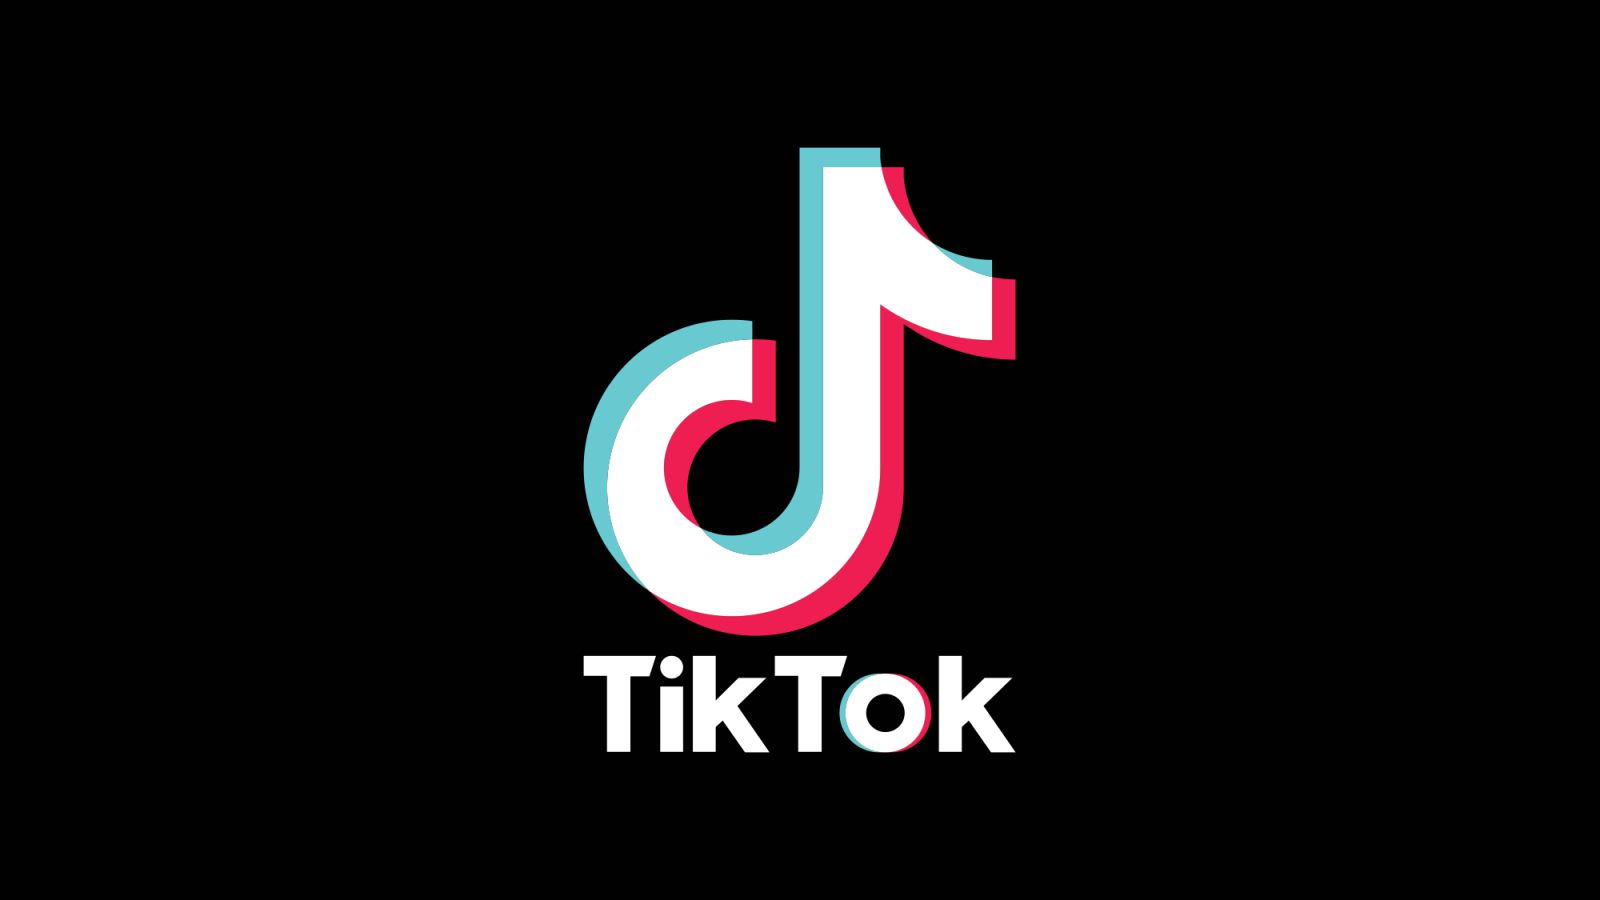 TikTok Announces Launch of Hashtag Content Filters and New Safety Tools